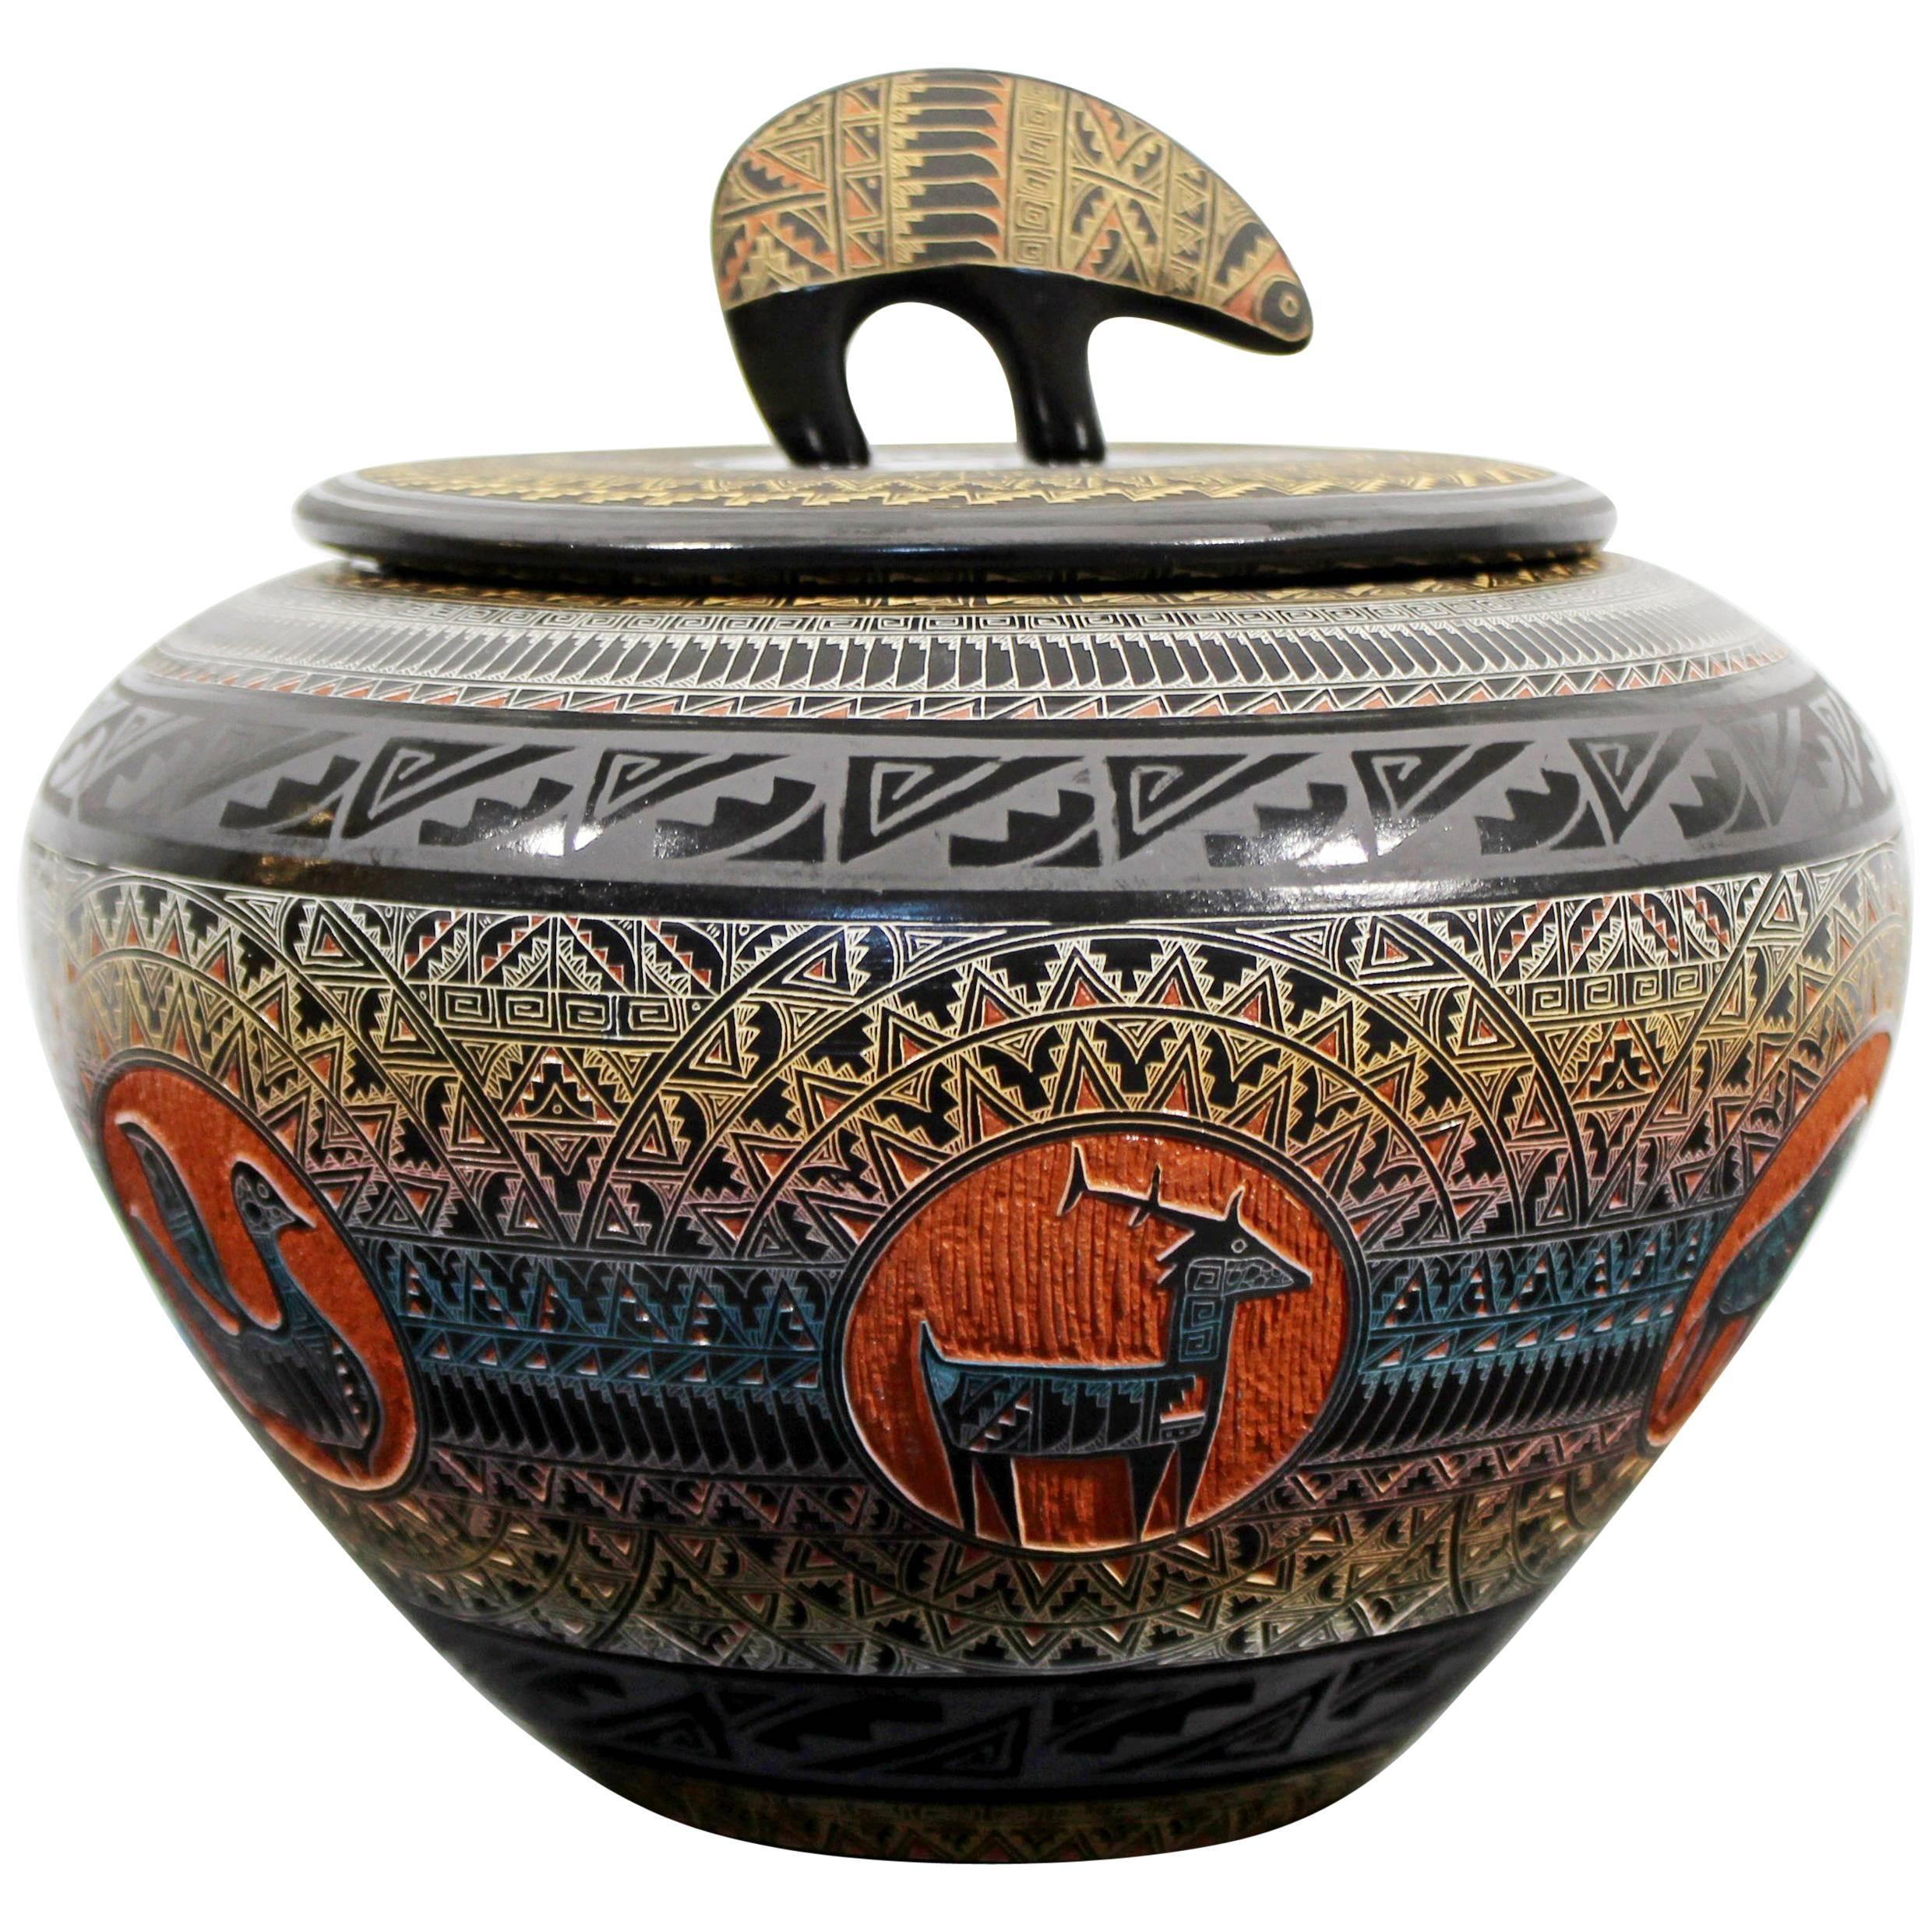 Marvin Blackmore Geo Series New Mexico Ceramic Lidded Vessel Pottery Bowl